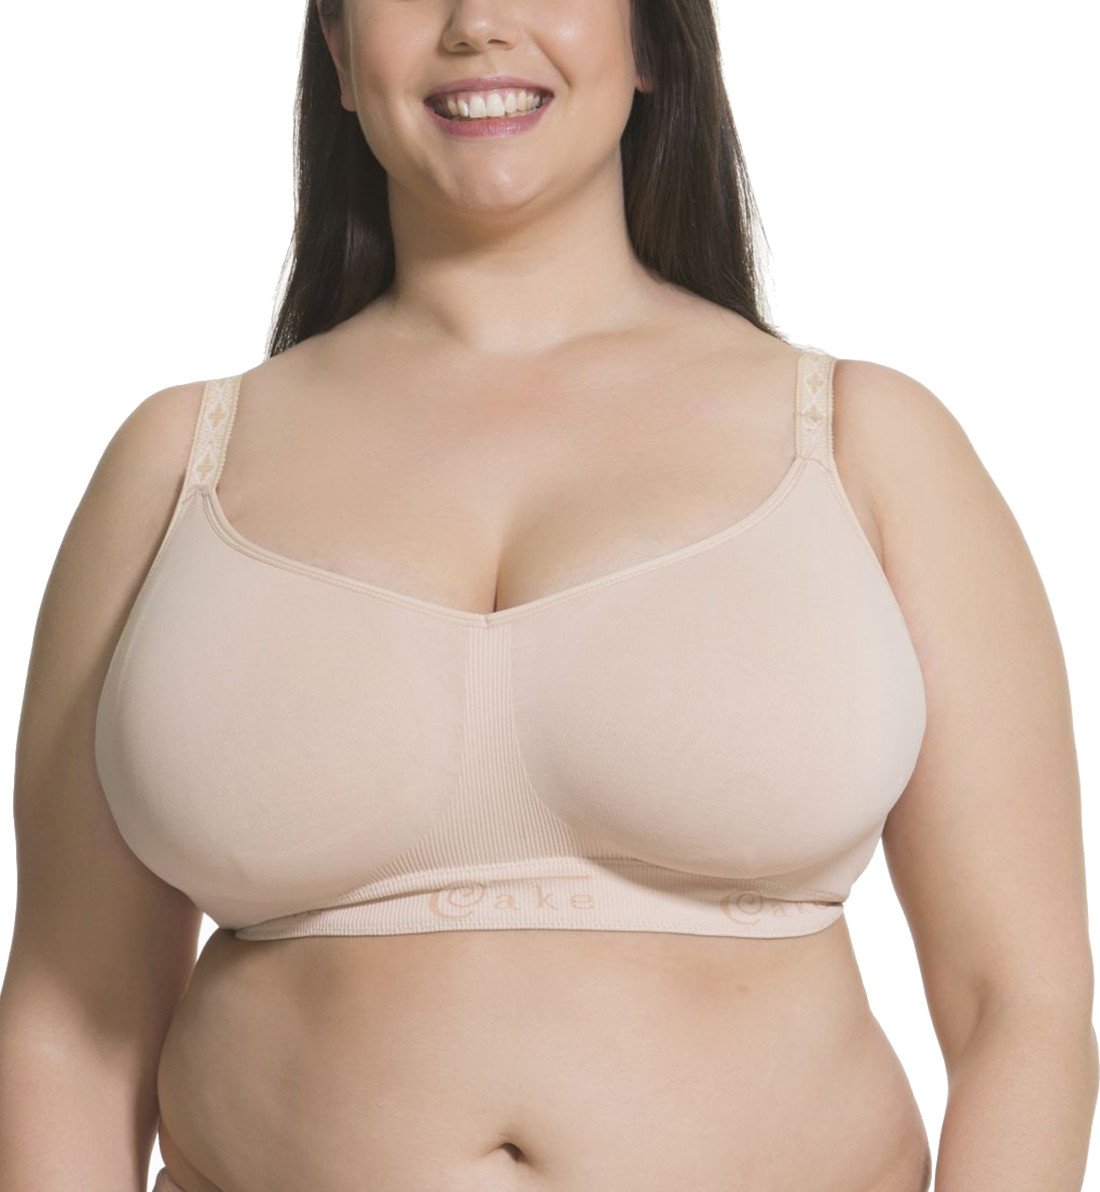 Sugar Candy by Cake Seamless Fuller Bust Everyday Softcup G-L (28-8005),30XS,Nude - Nude,XS